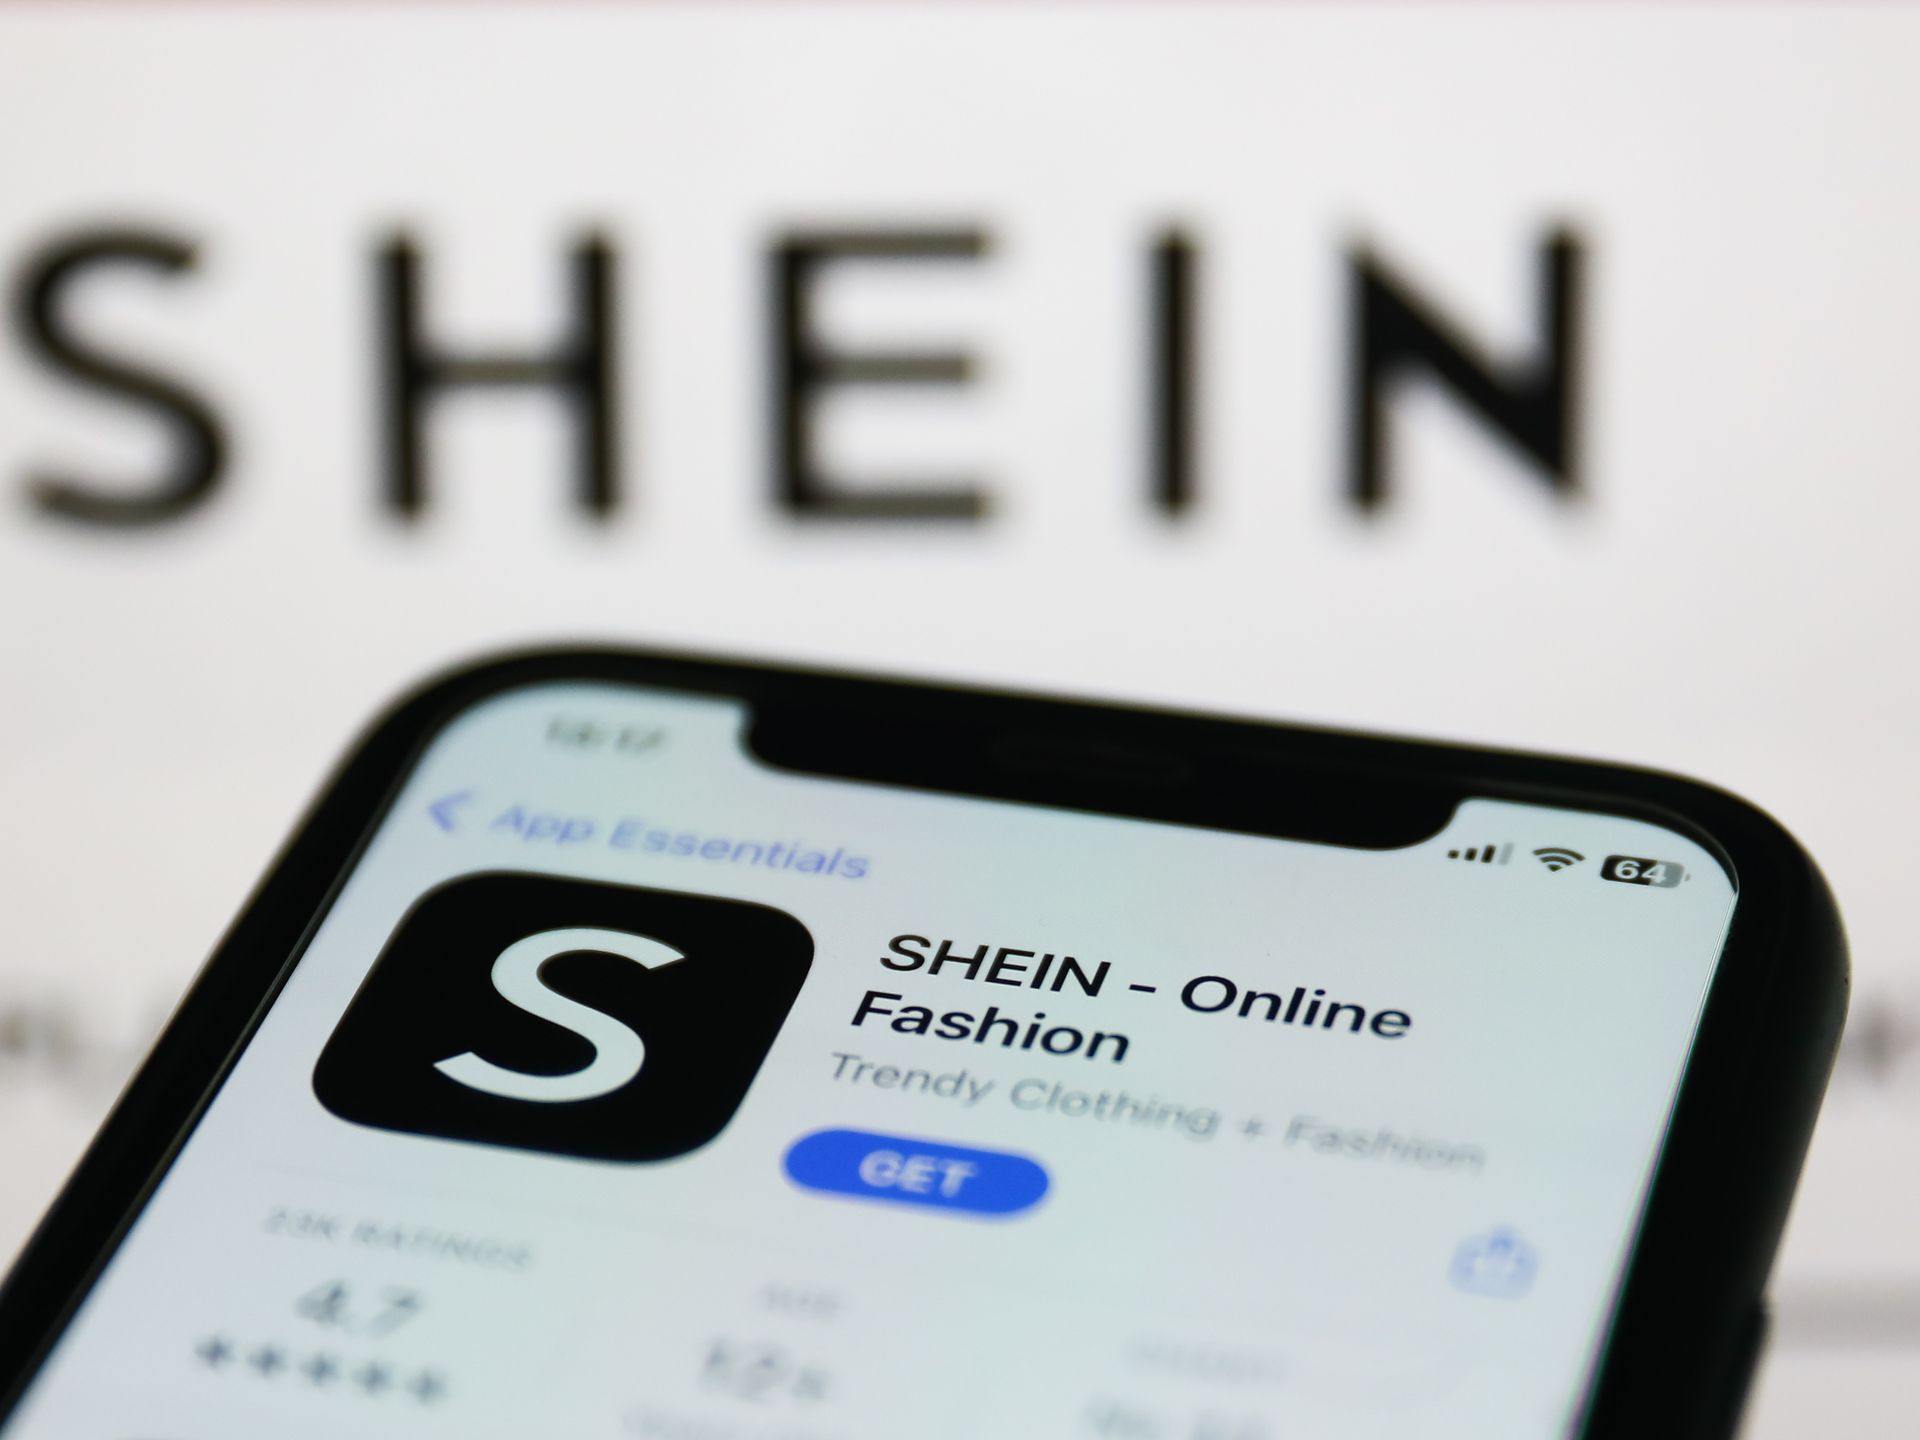 Shein Quietly Files for U.S. IPO - Retail TouchPoints